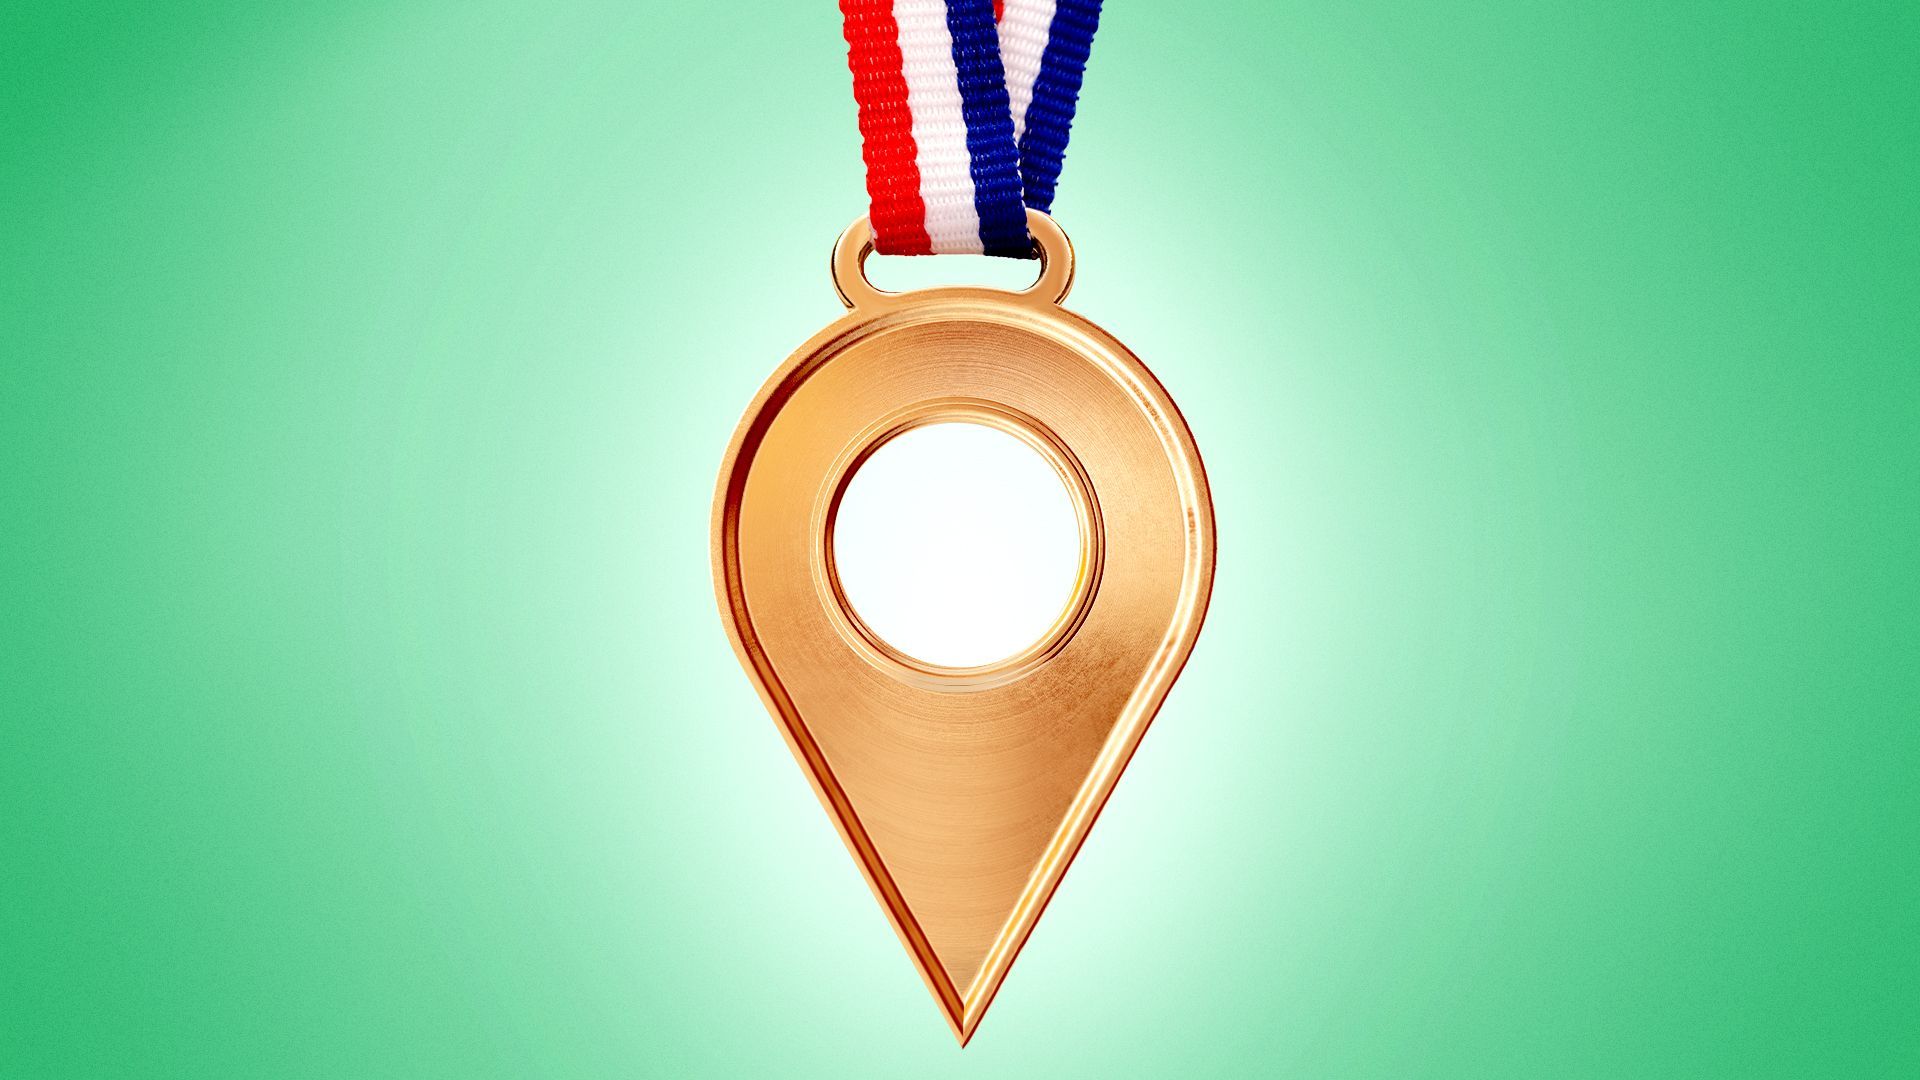 Illustration of a winner's medal shaped like a location pin.